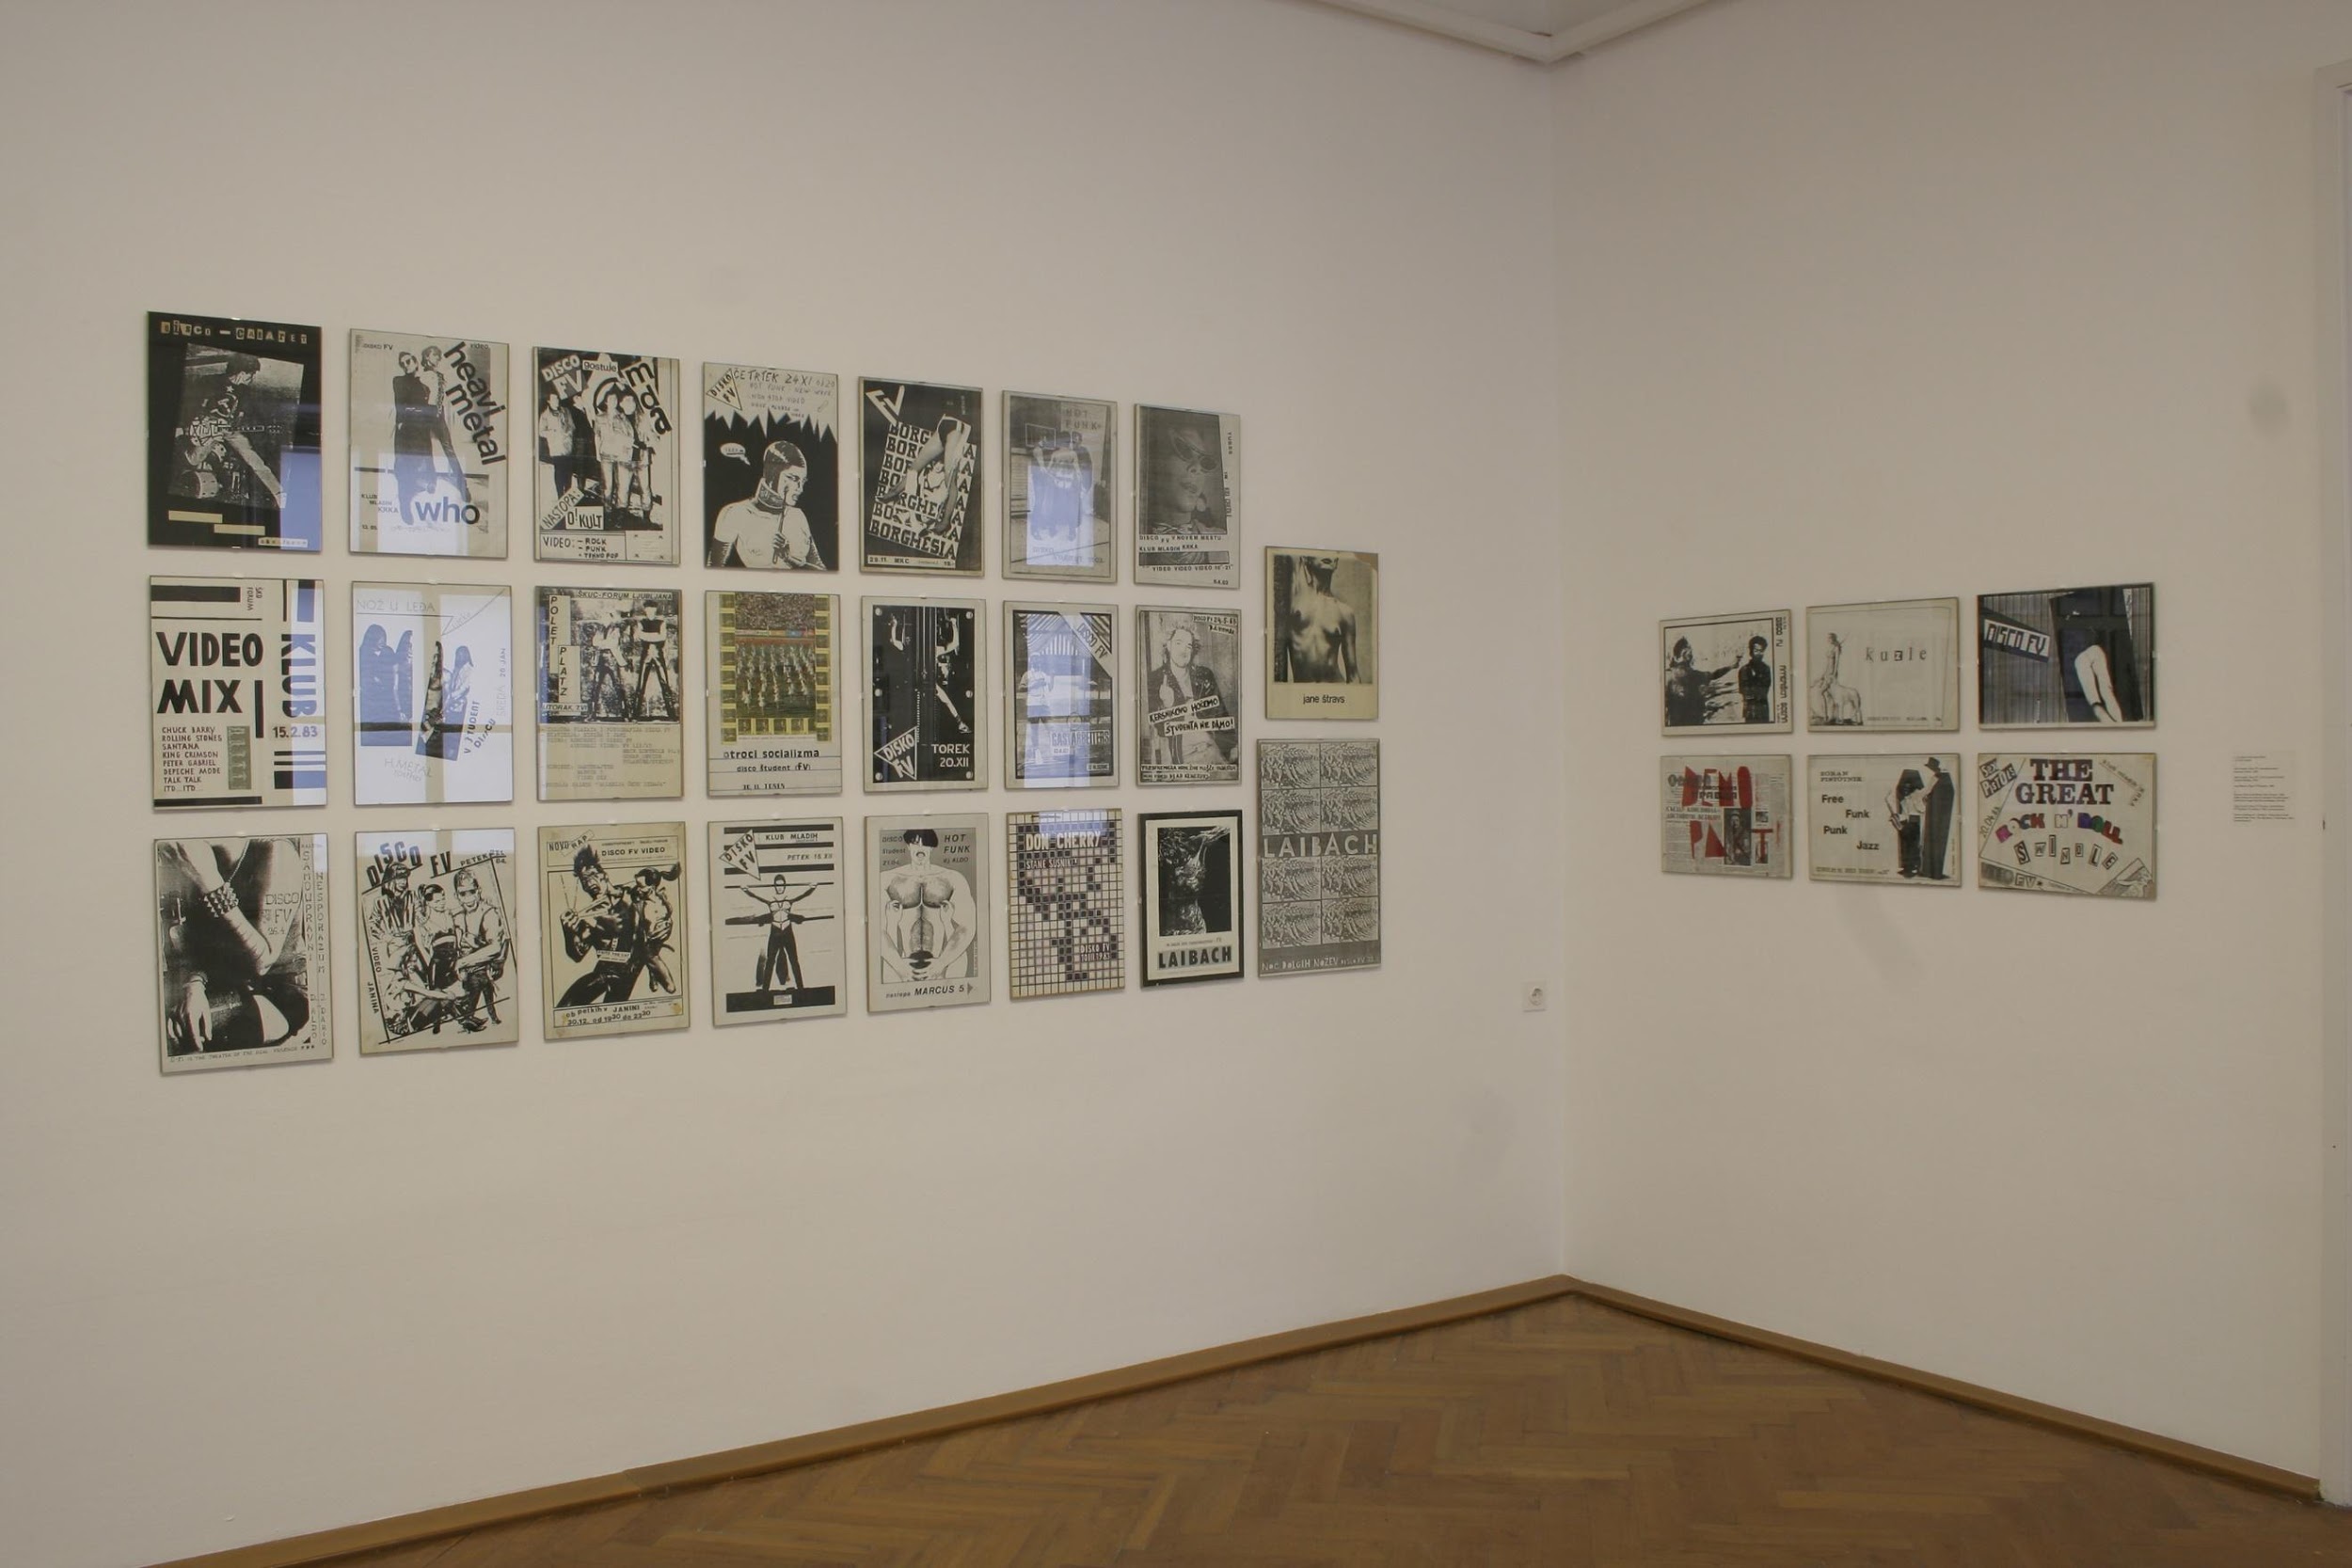 A photograph from the exhibition FV: Alternativa osemdesetih/The Alternative Scene in the Eighties held at the ICGA from 27 November 2008 to 18 January 2009.